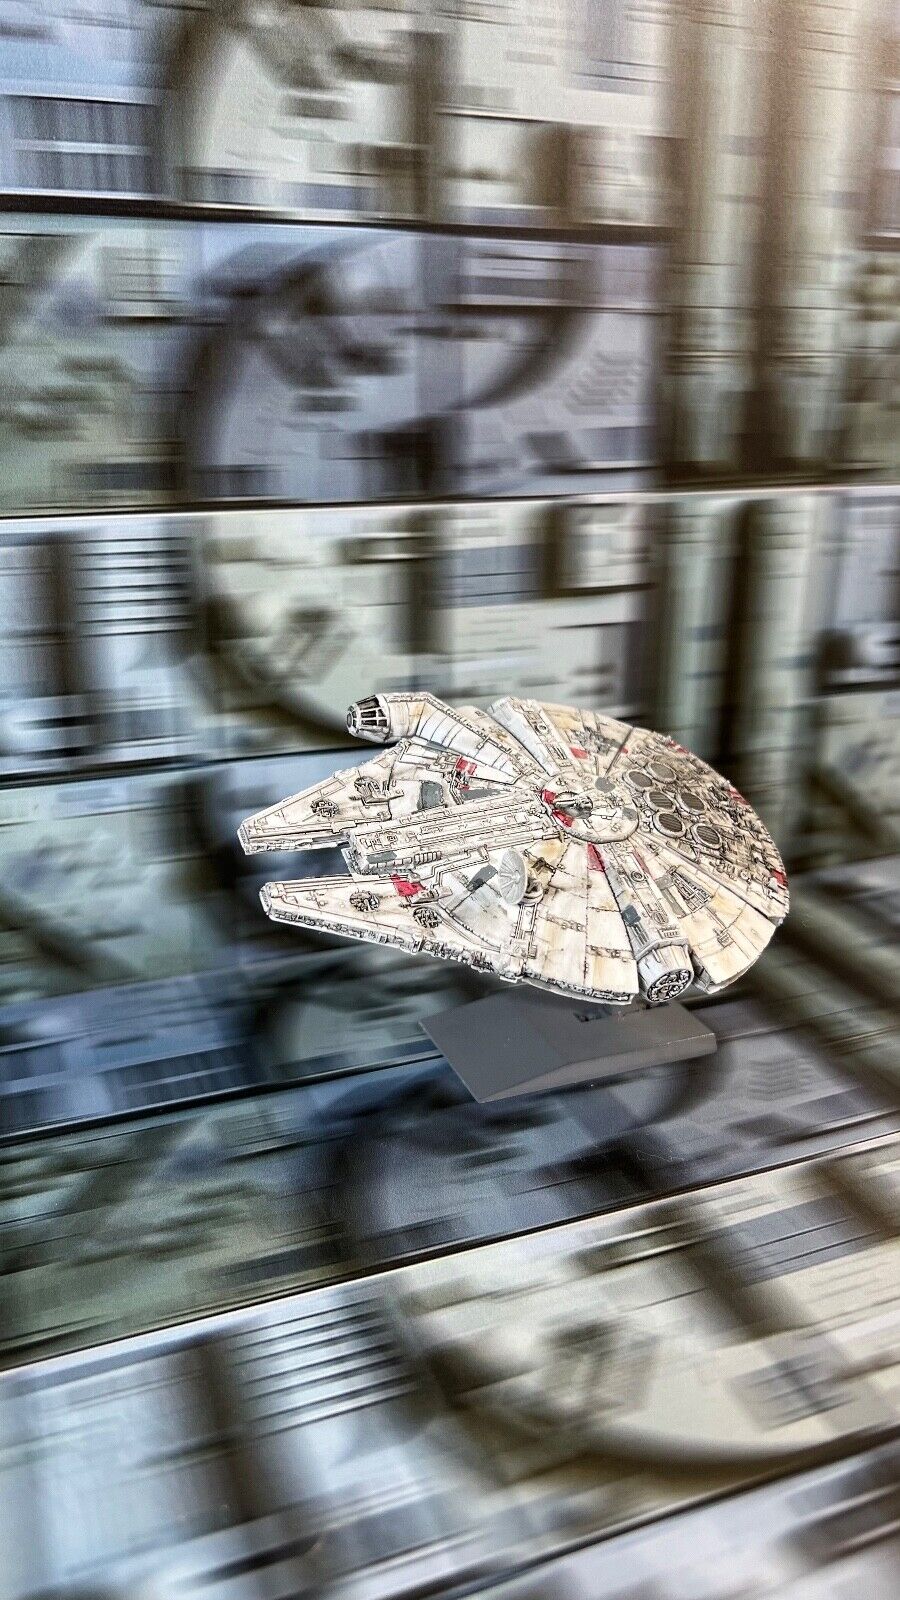 1/350 Scale Bandai Pro-Built Expertly Painted Star Wars Millennium Falcon Model